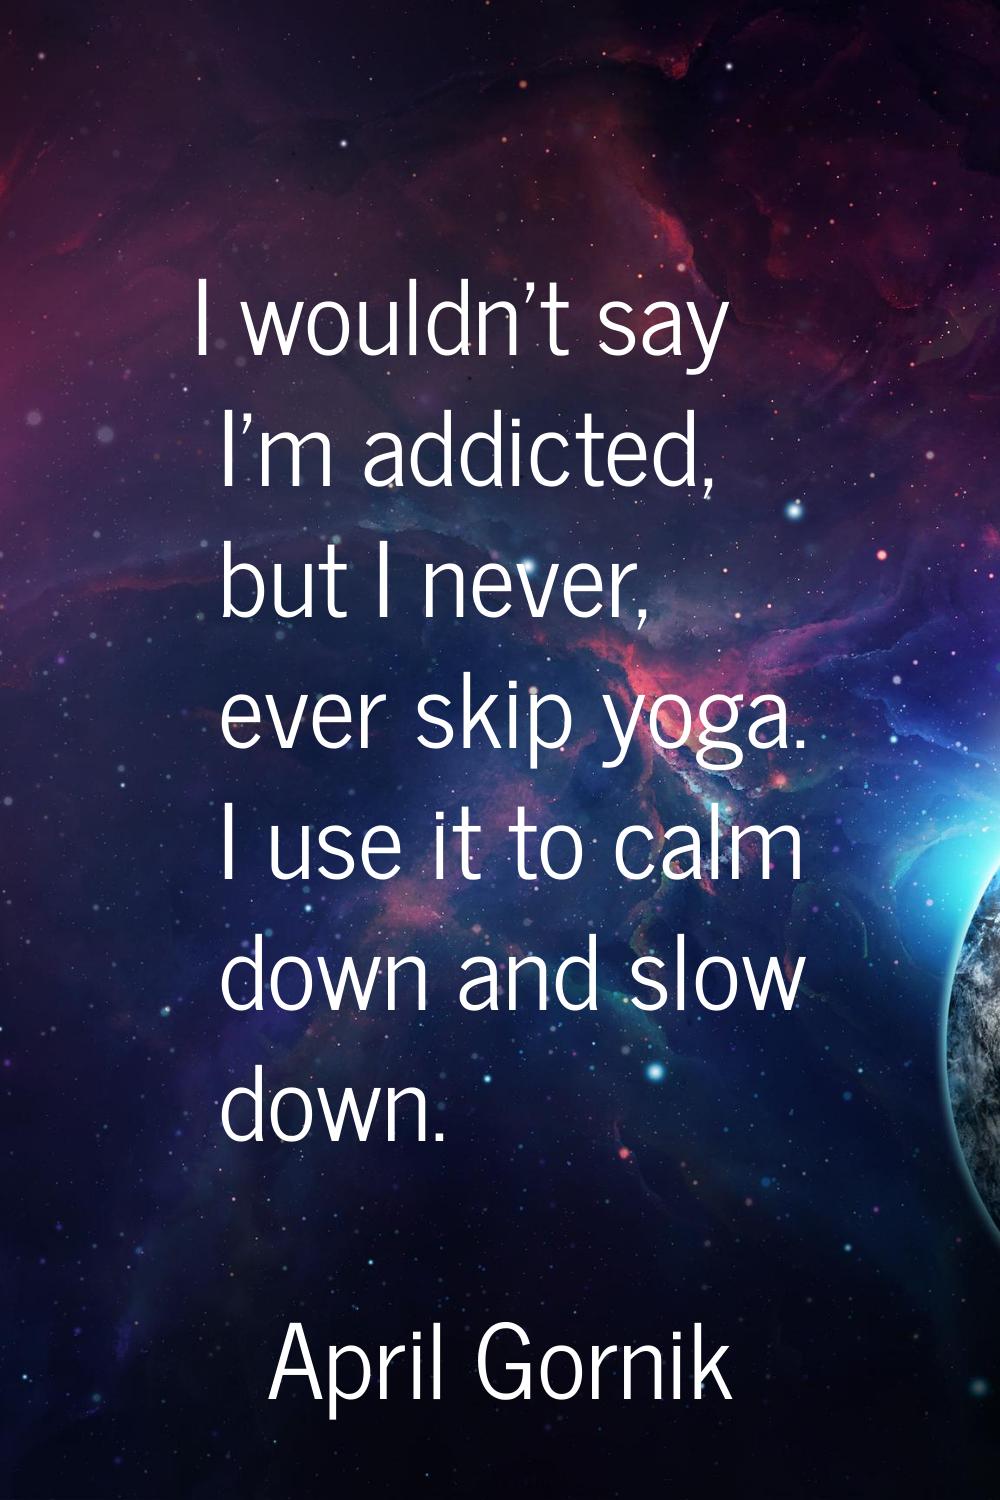 I wouldn't say I'm addicted, but I never, ever skip yoga. I use it to calm down and slow down.